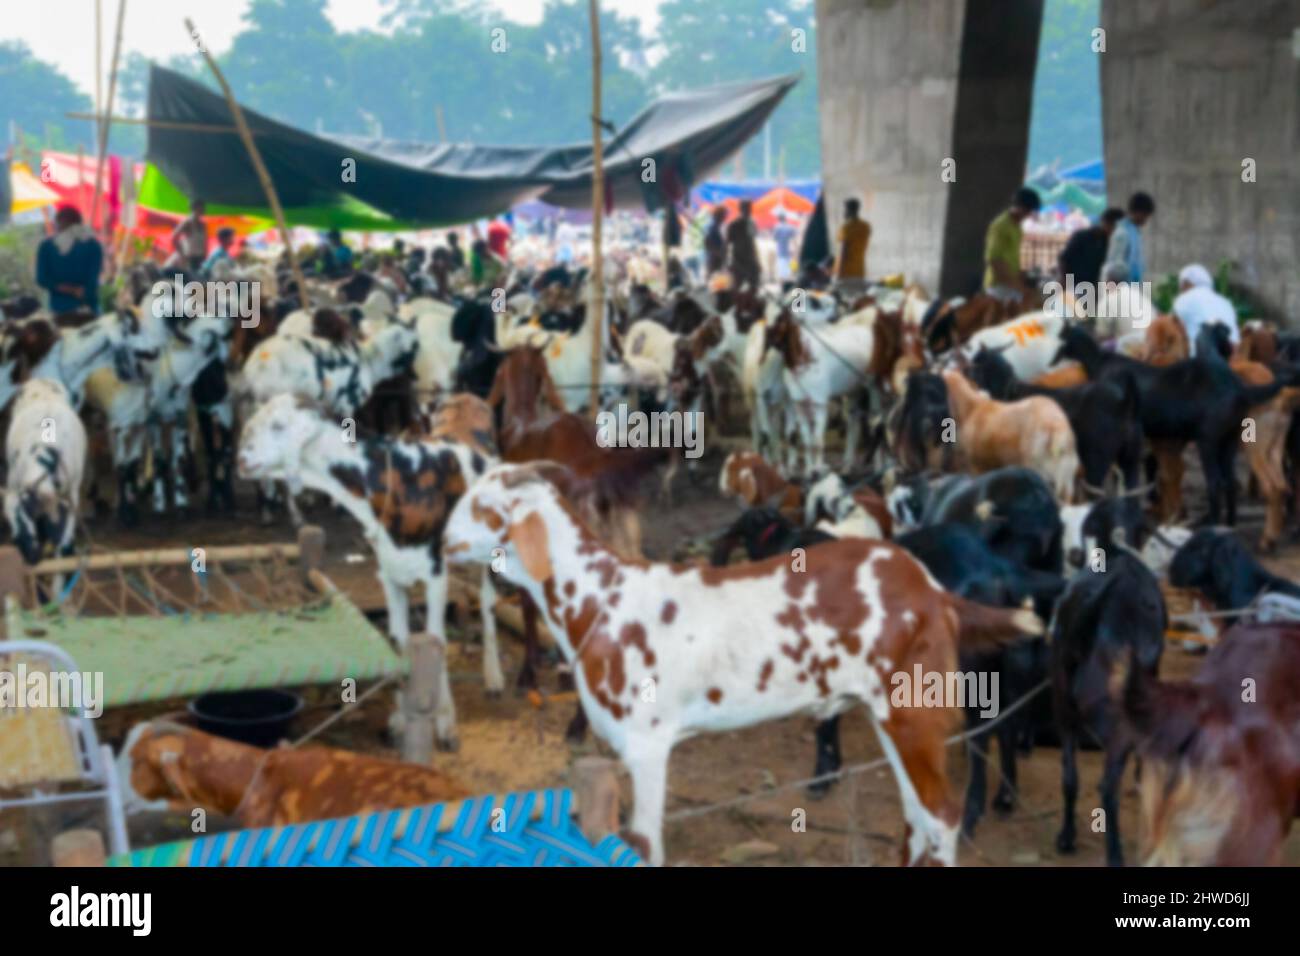 Blurred image of Goats are being sold in market during 'Eid al-Adha' or 'Feast of the Sacrifice' or Eid Qurban or 'Festival of the Sacrifice',to be sa Stock Photo